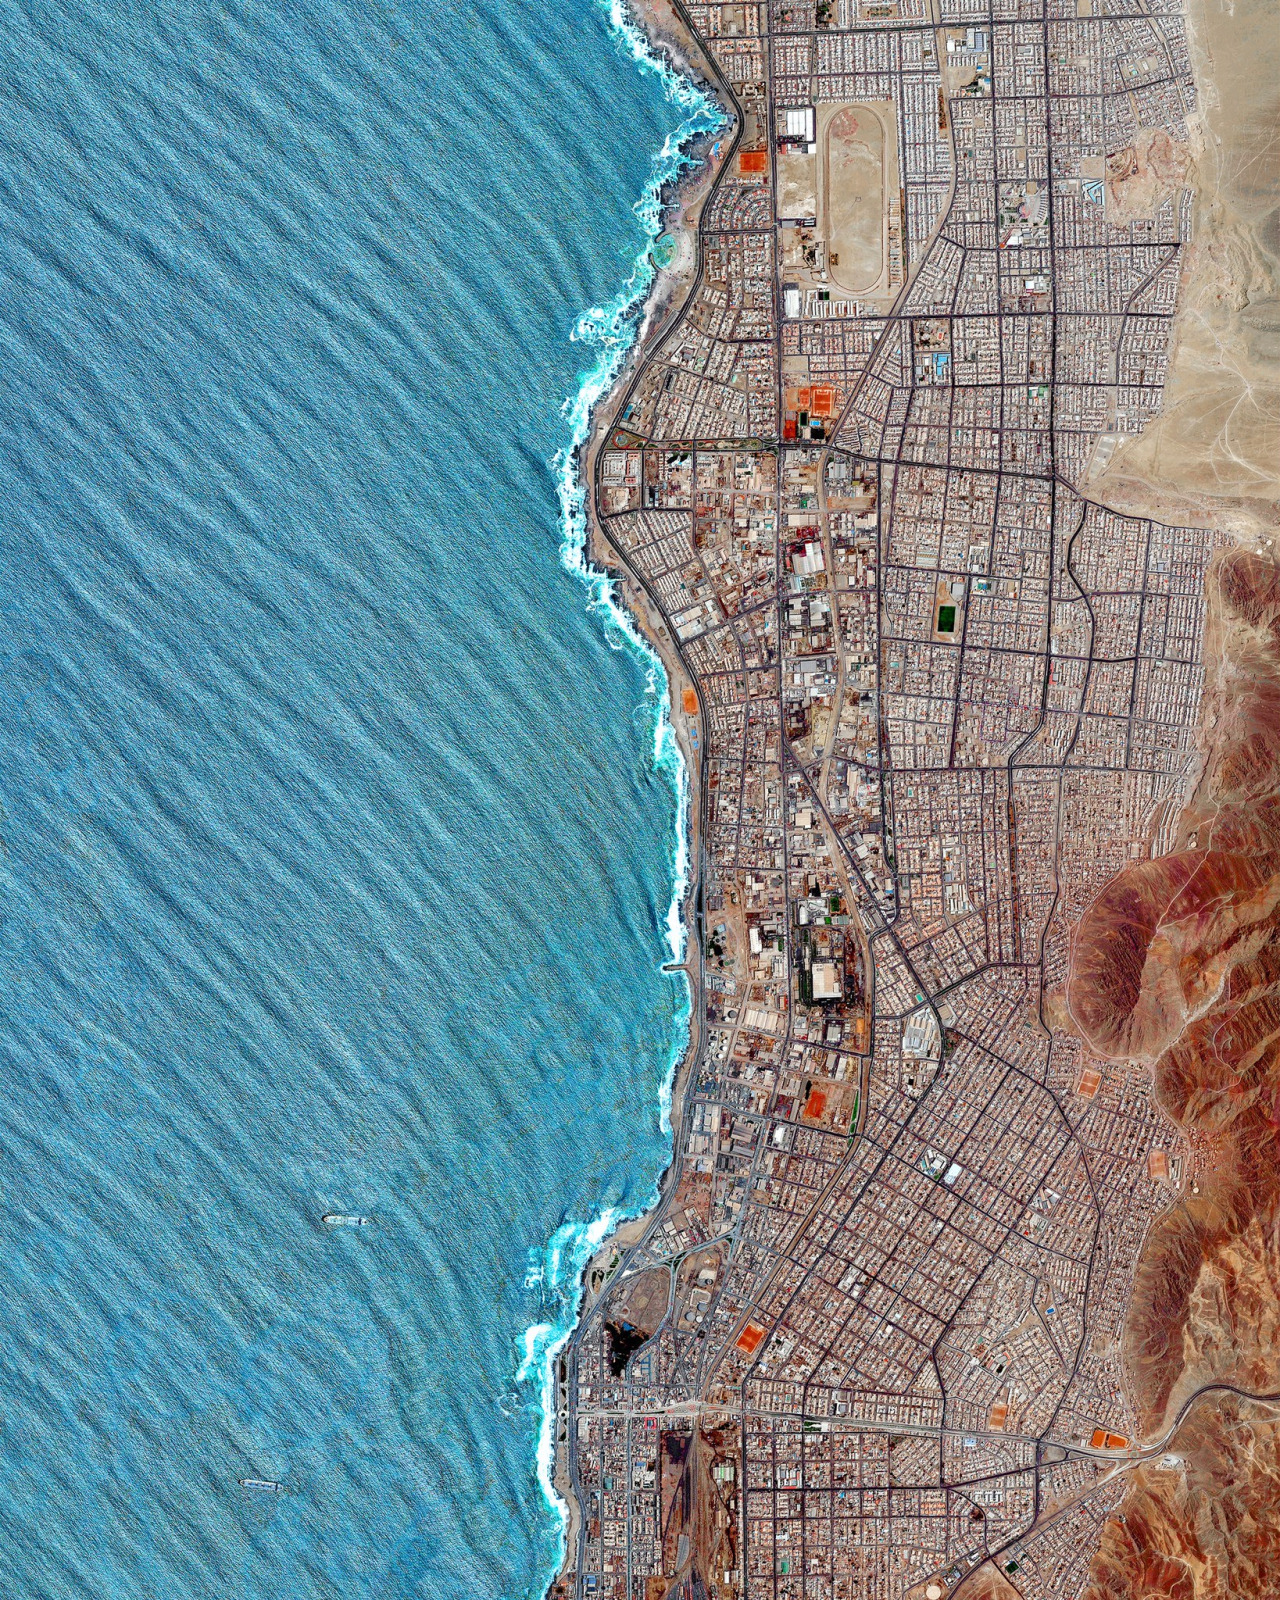 Waves of the Pacific Ocean roll into the city of Antofagasta, situated on the coast of Chile. Because this area is situated in the Atacama Desert - the driest region in the world - it has incredibly sparse vegetation. In total, Antofagasta is home to...